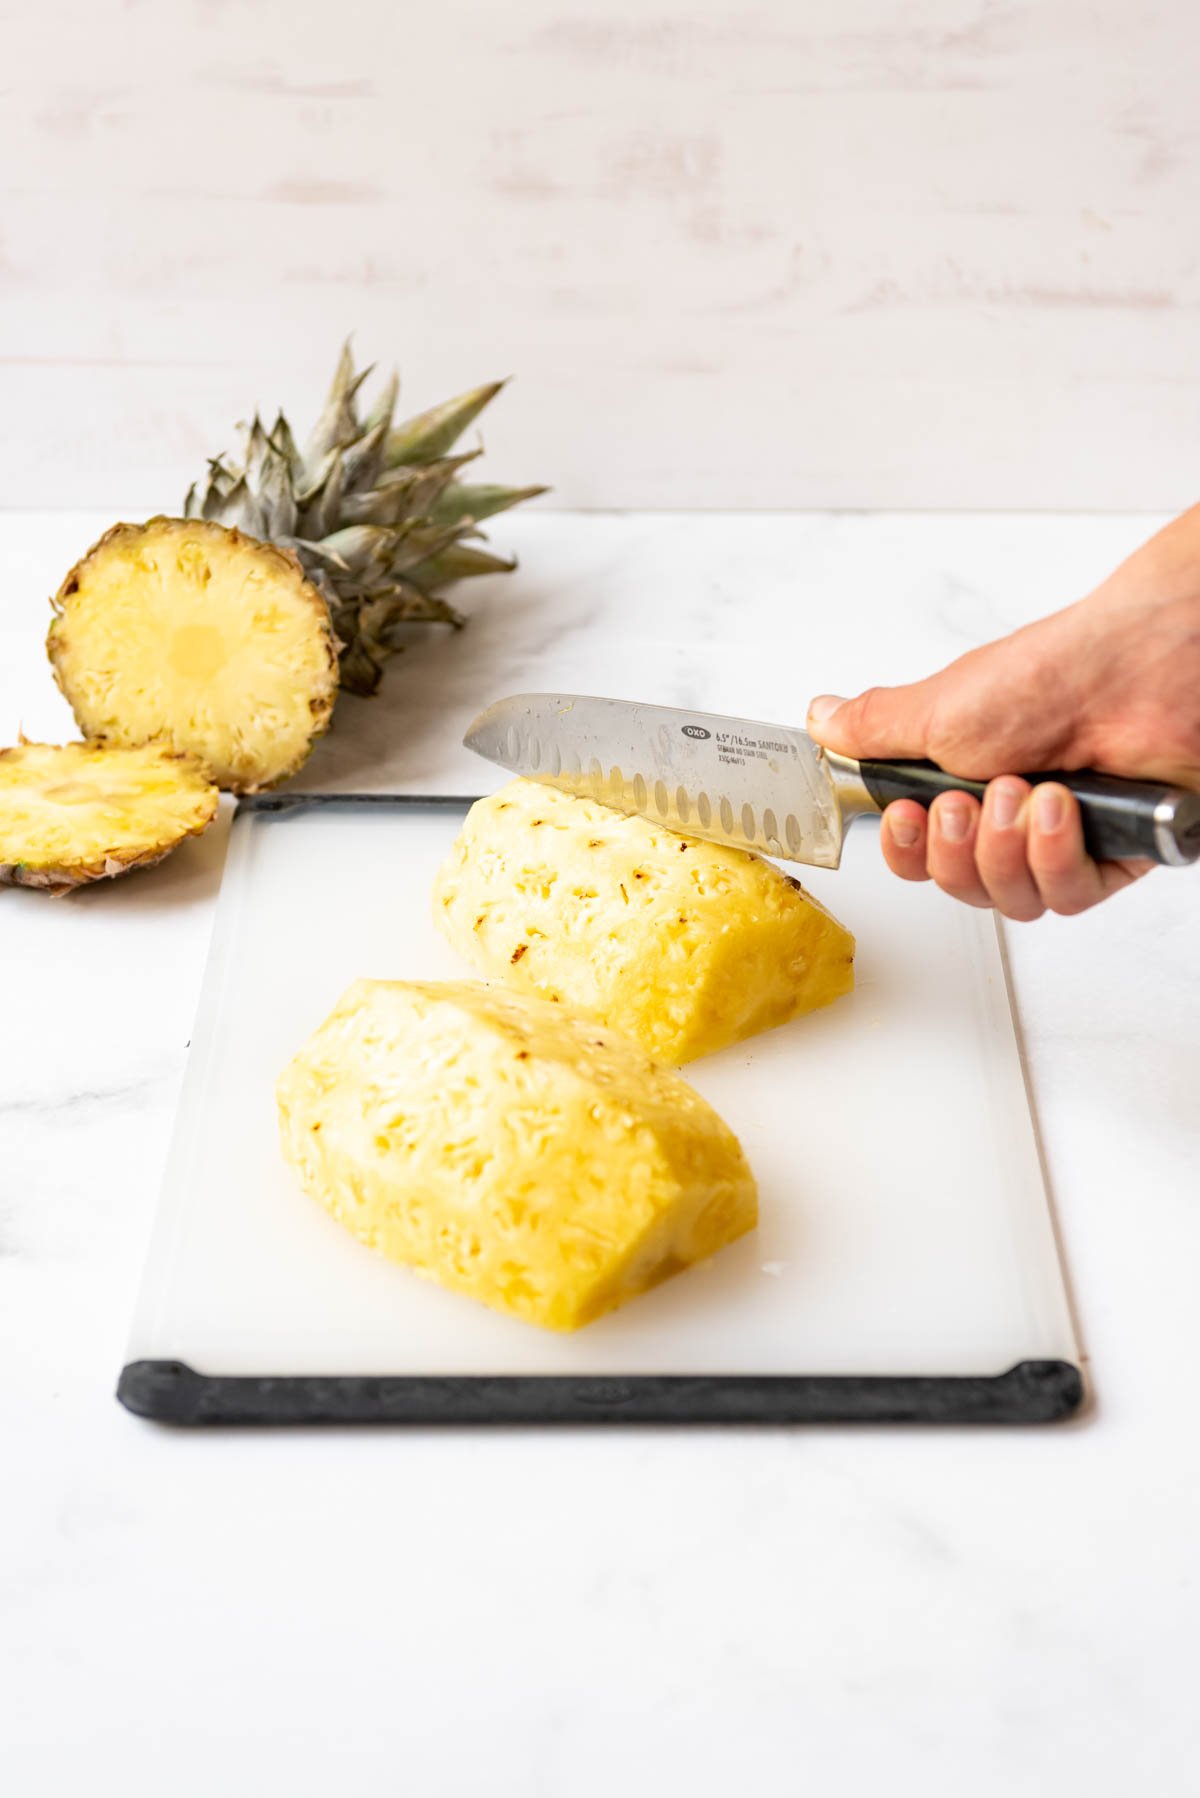 A hand holding a knife to cut pineapple on a cutting board.